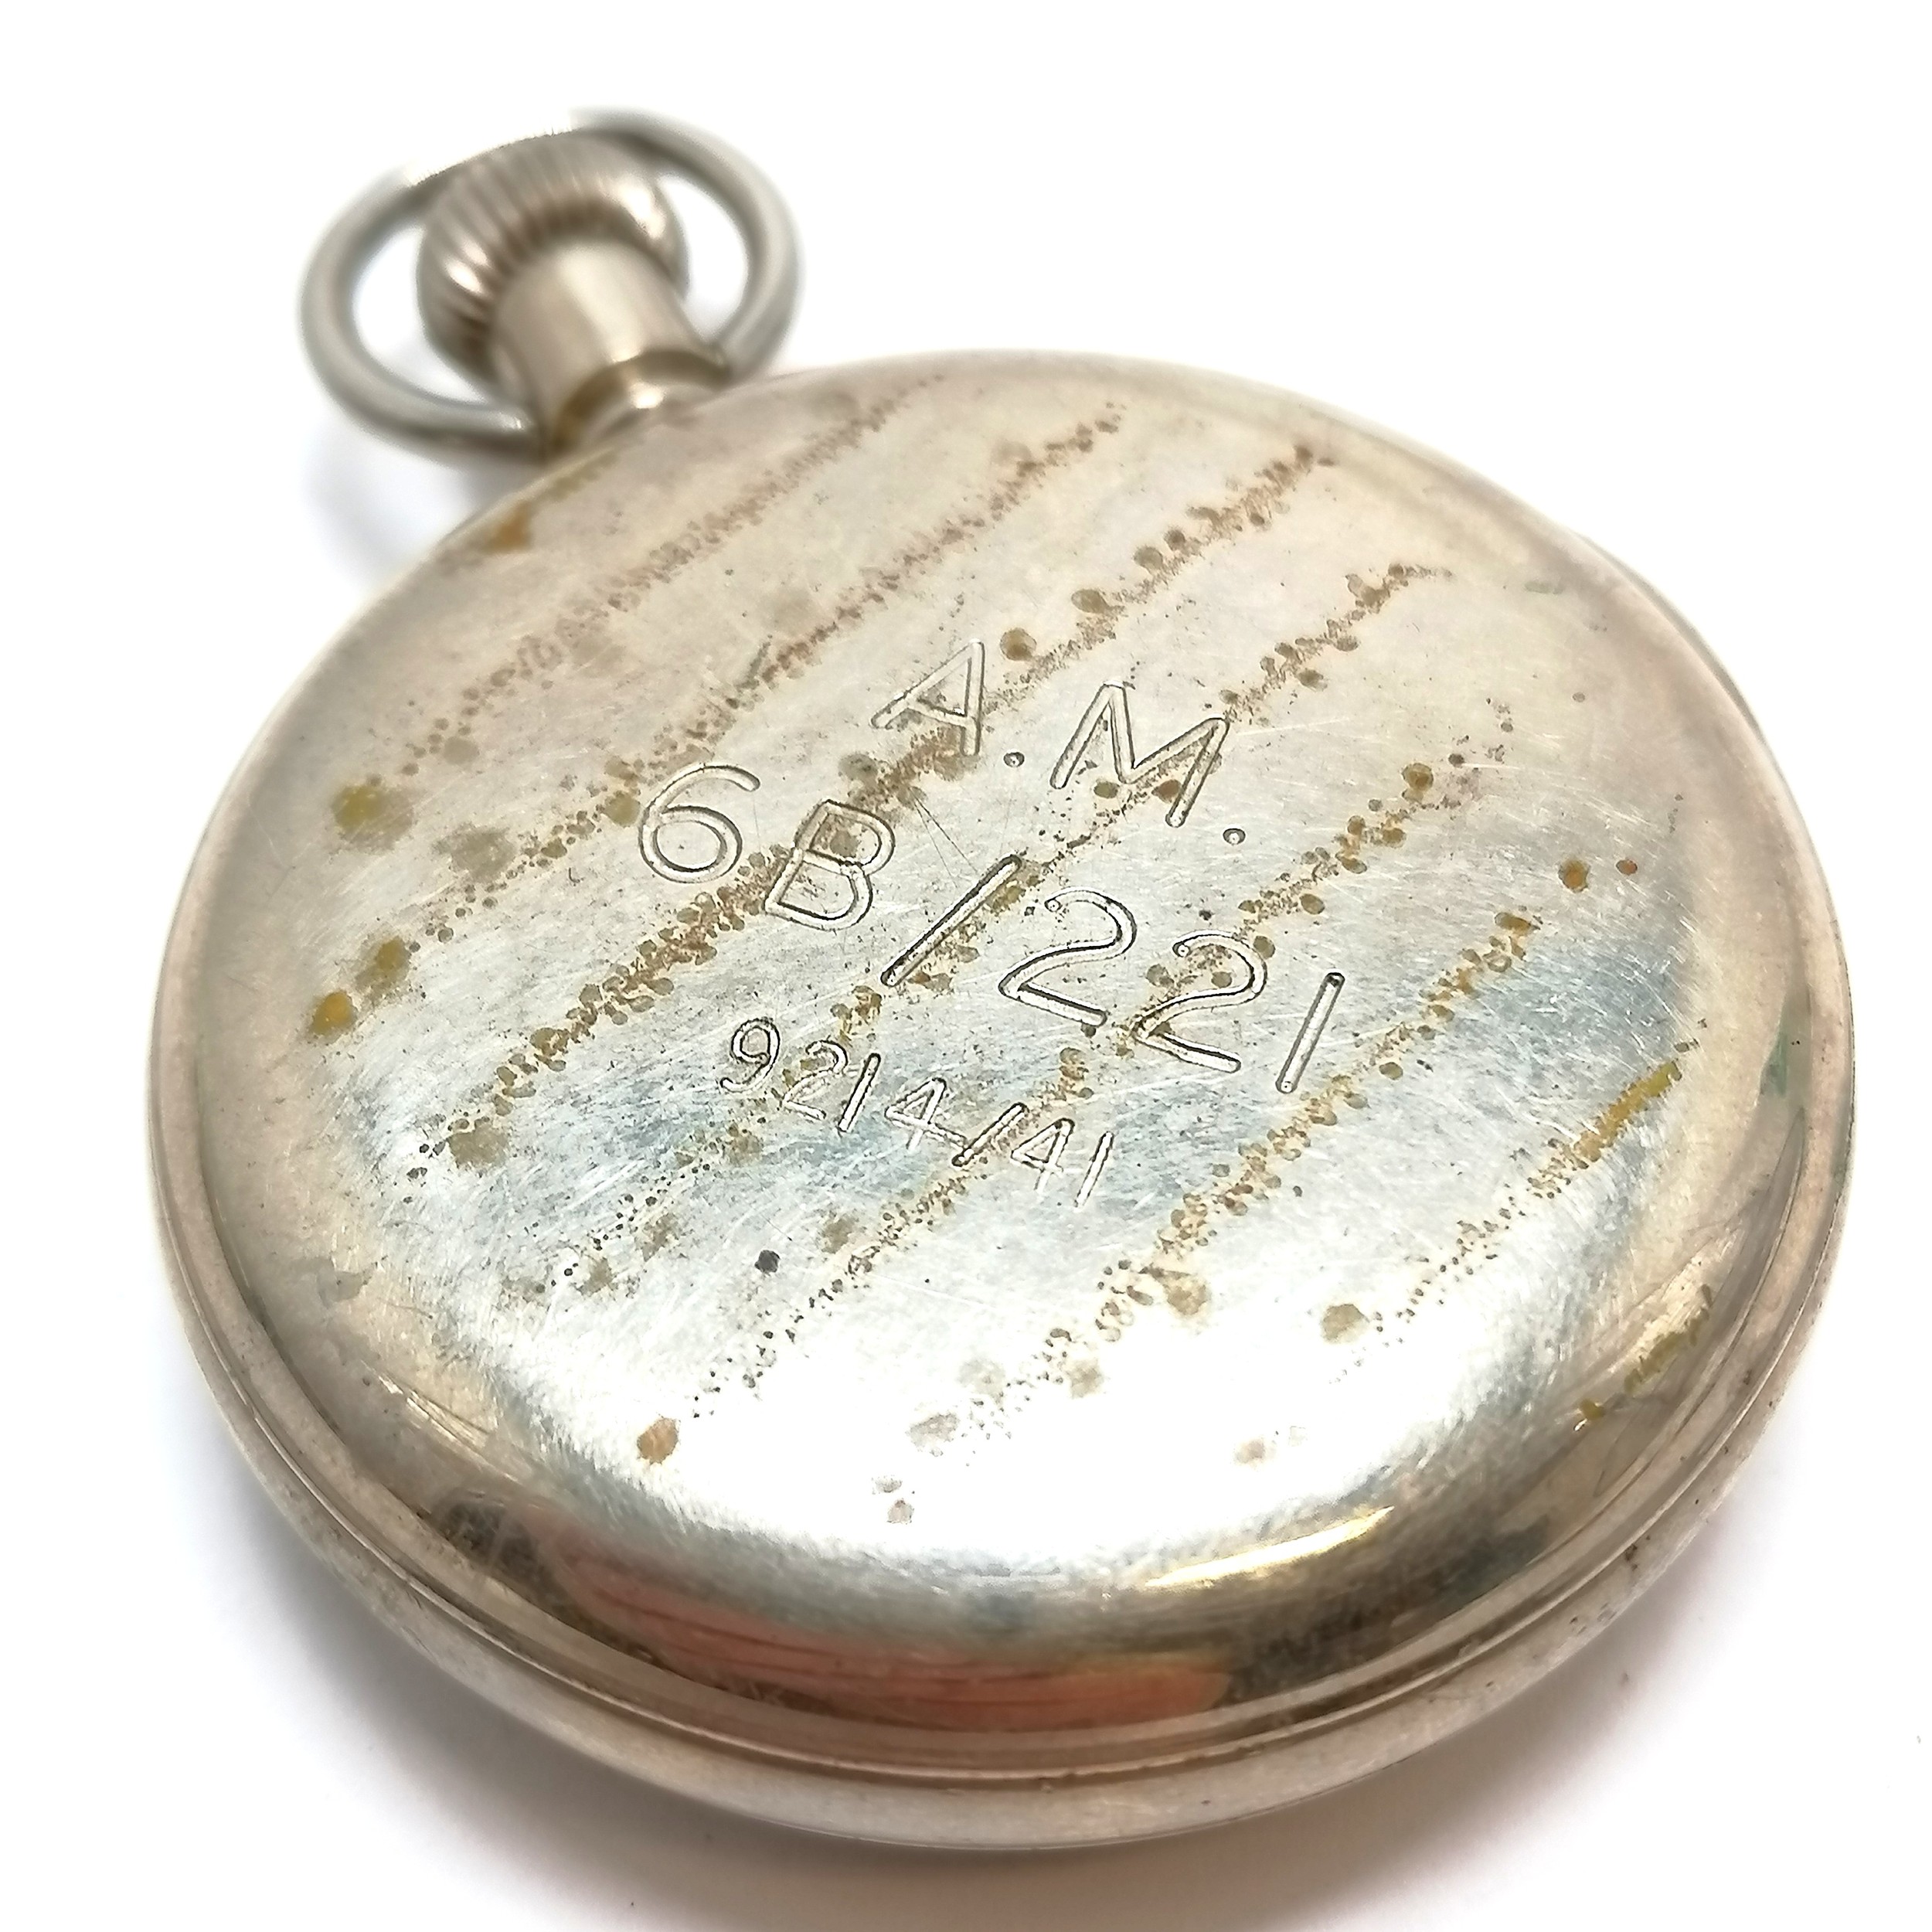 Air Ministry GS MK II pocket watch by Carley & Clemence t/w Air Ministry AM 6B/221 stop watch ~ both - Image 2 of 3